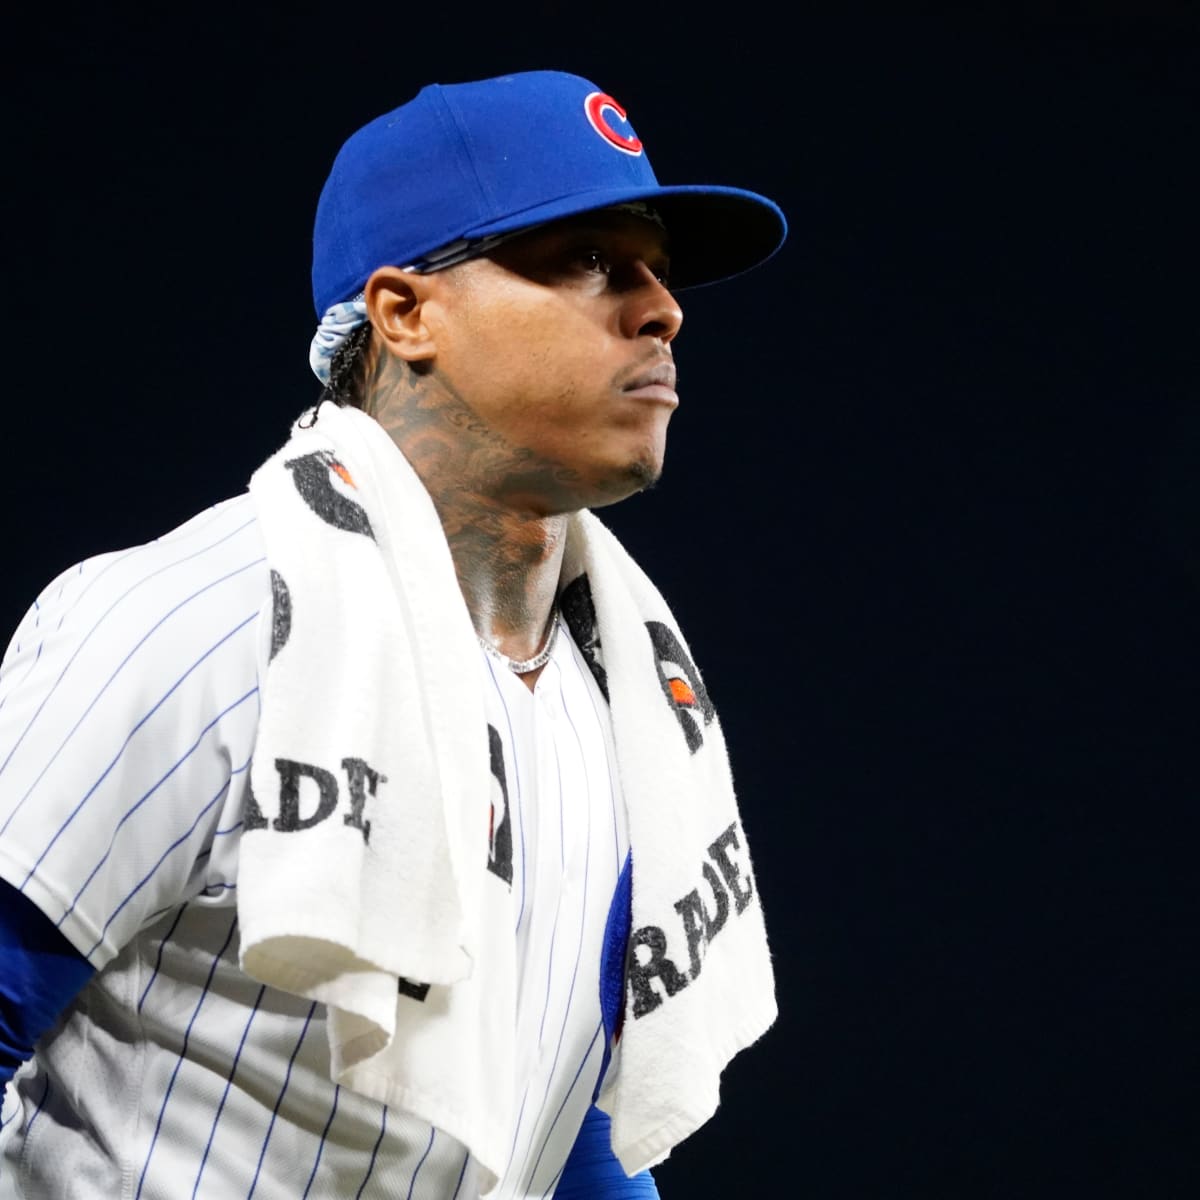 Keys to success for Cubs ace Marcus Stroman on Friday against Texas